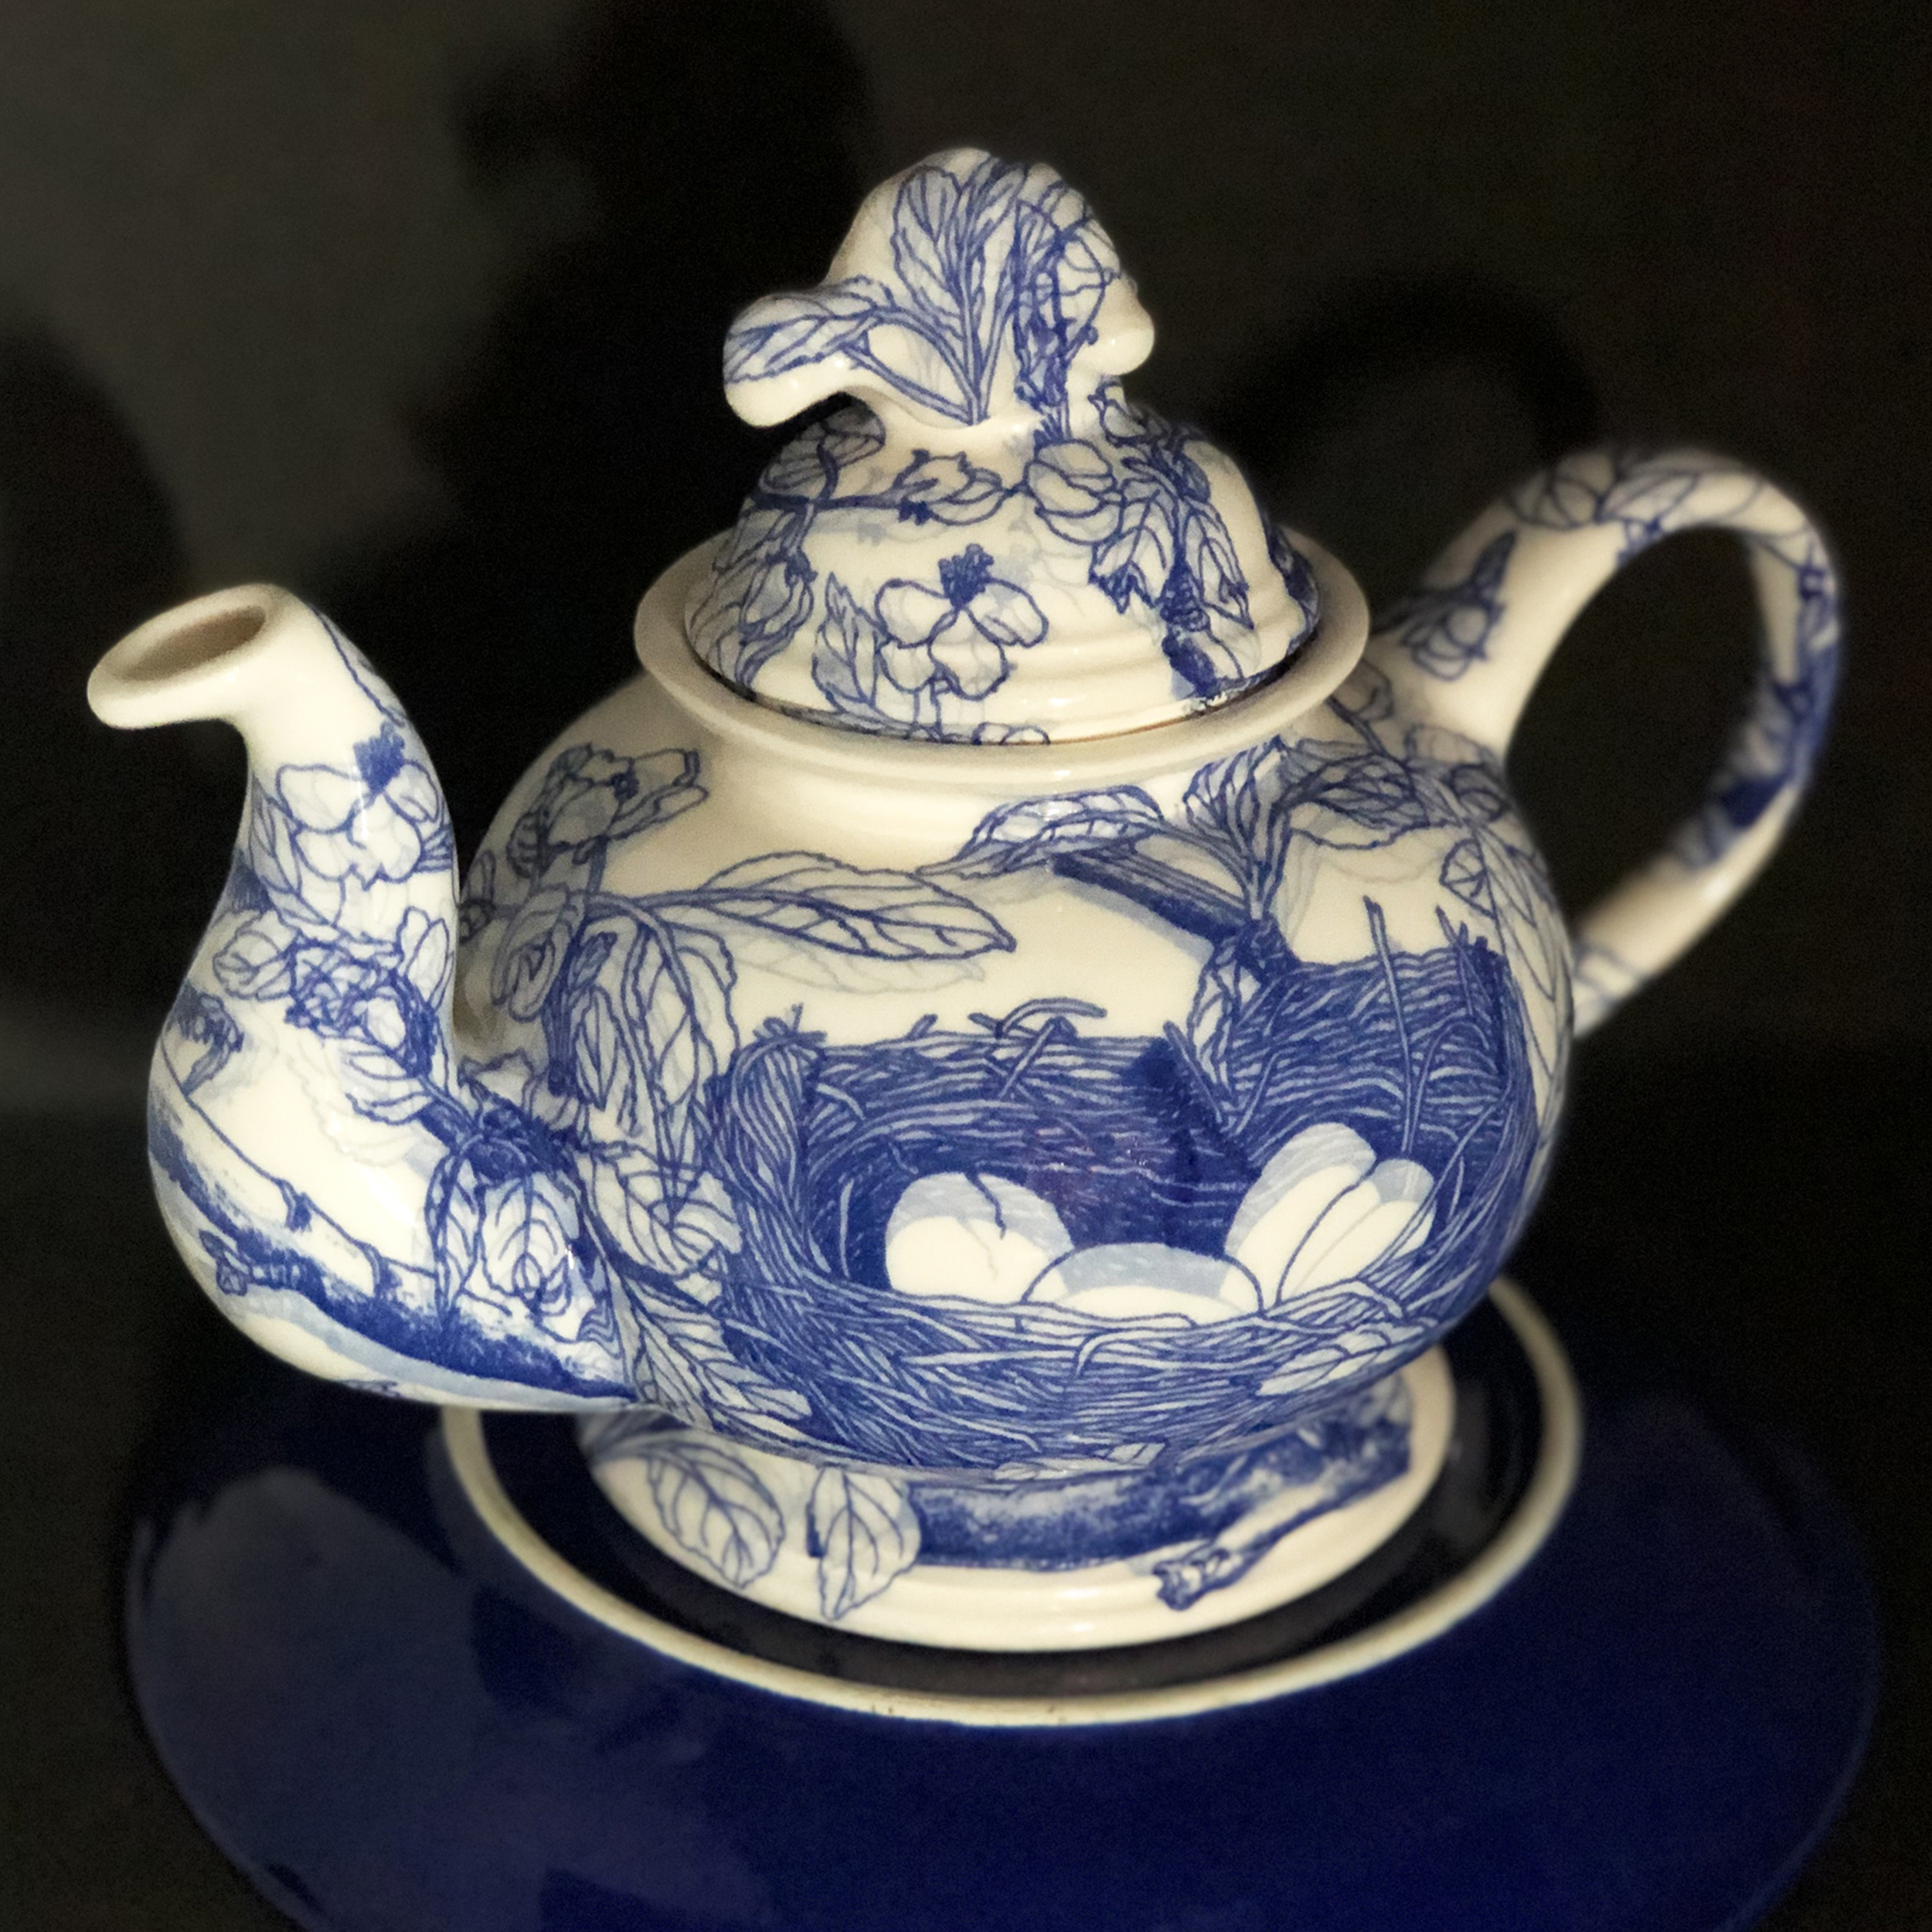 Stephanie Osser, Bluebird Teapot, 7 1/2 in. (19 cm) in height, slip-cast porcelain, clear glaze, fired to cone 5, decal transfers of the artist’s original illustrations from a non-fiction children’s book, second firing to cone 4